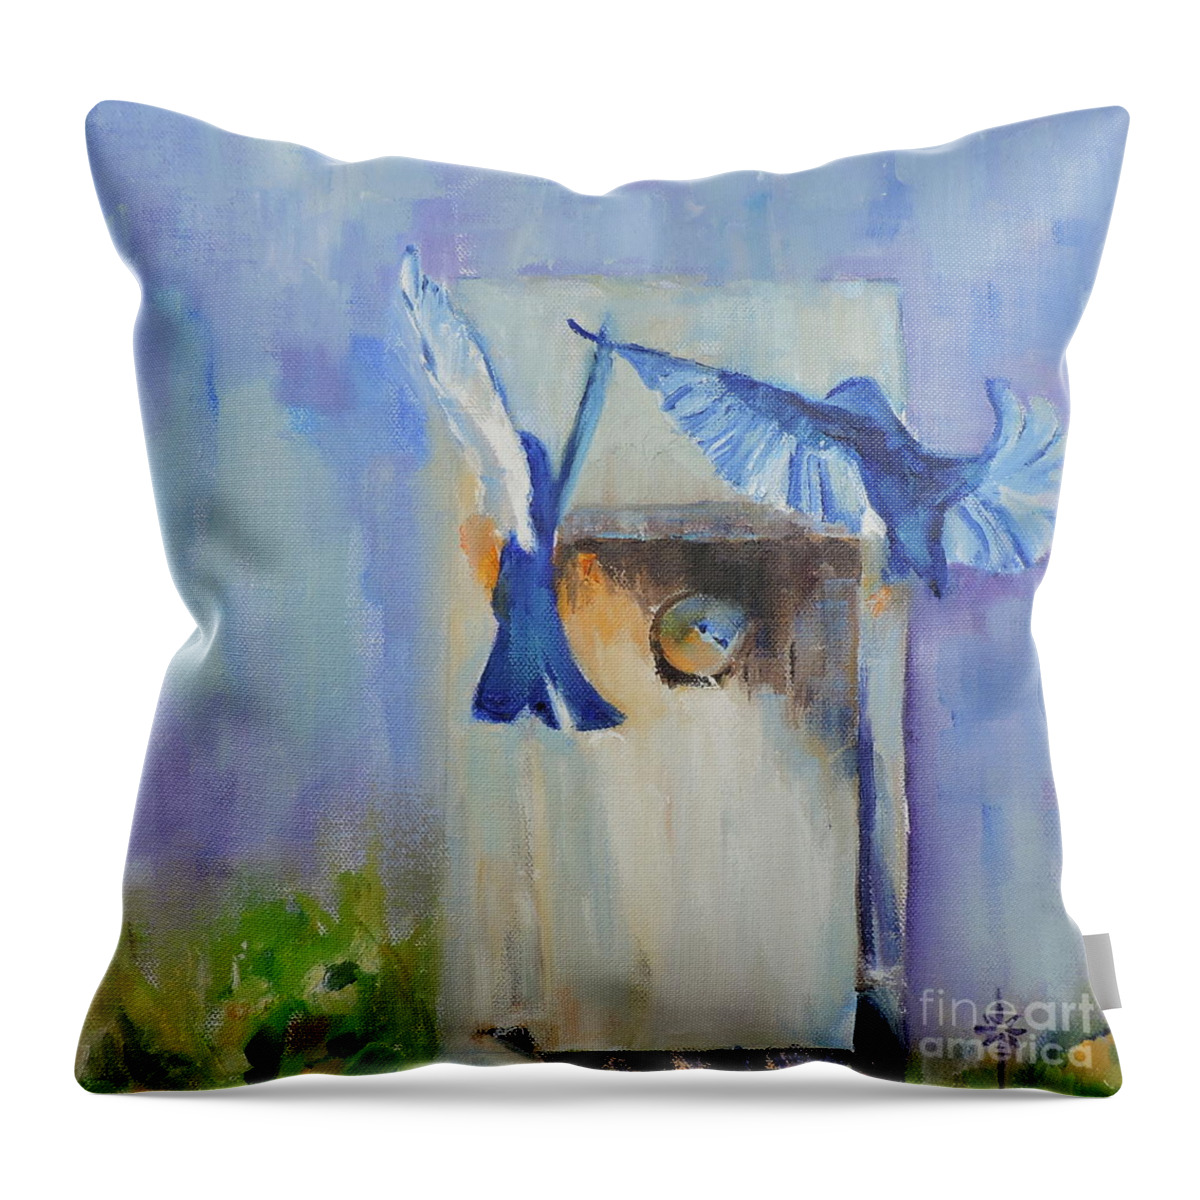 Bluebirds Throw Pillow featuring the painting The Family by Jodie Marie Anne Richardson Traugott     aka jm-ART